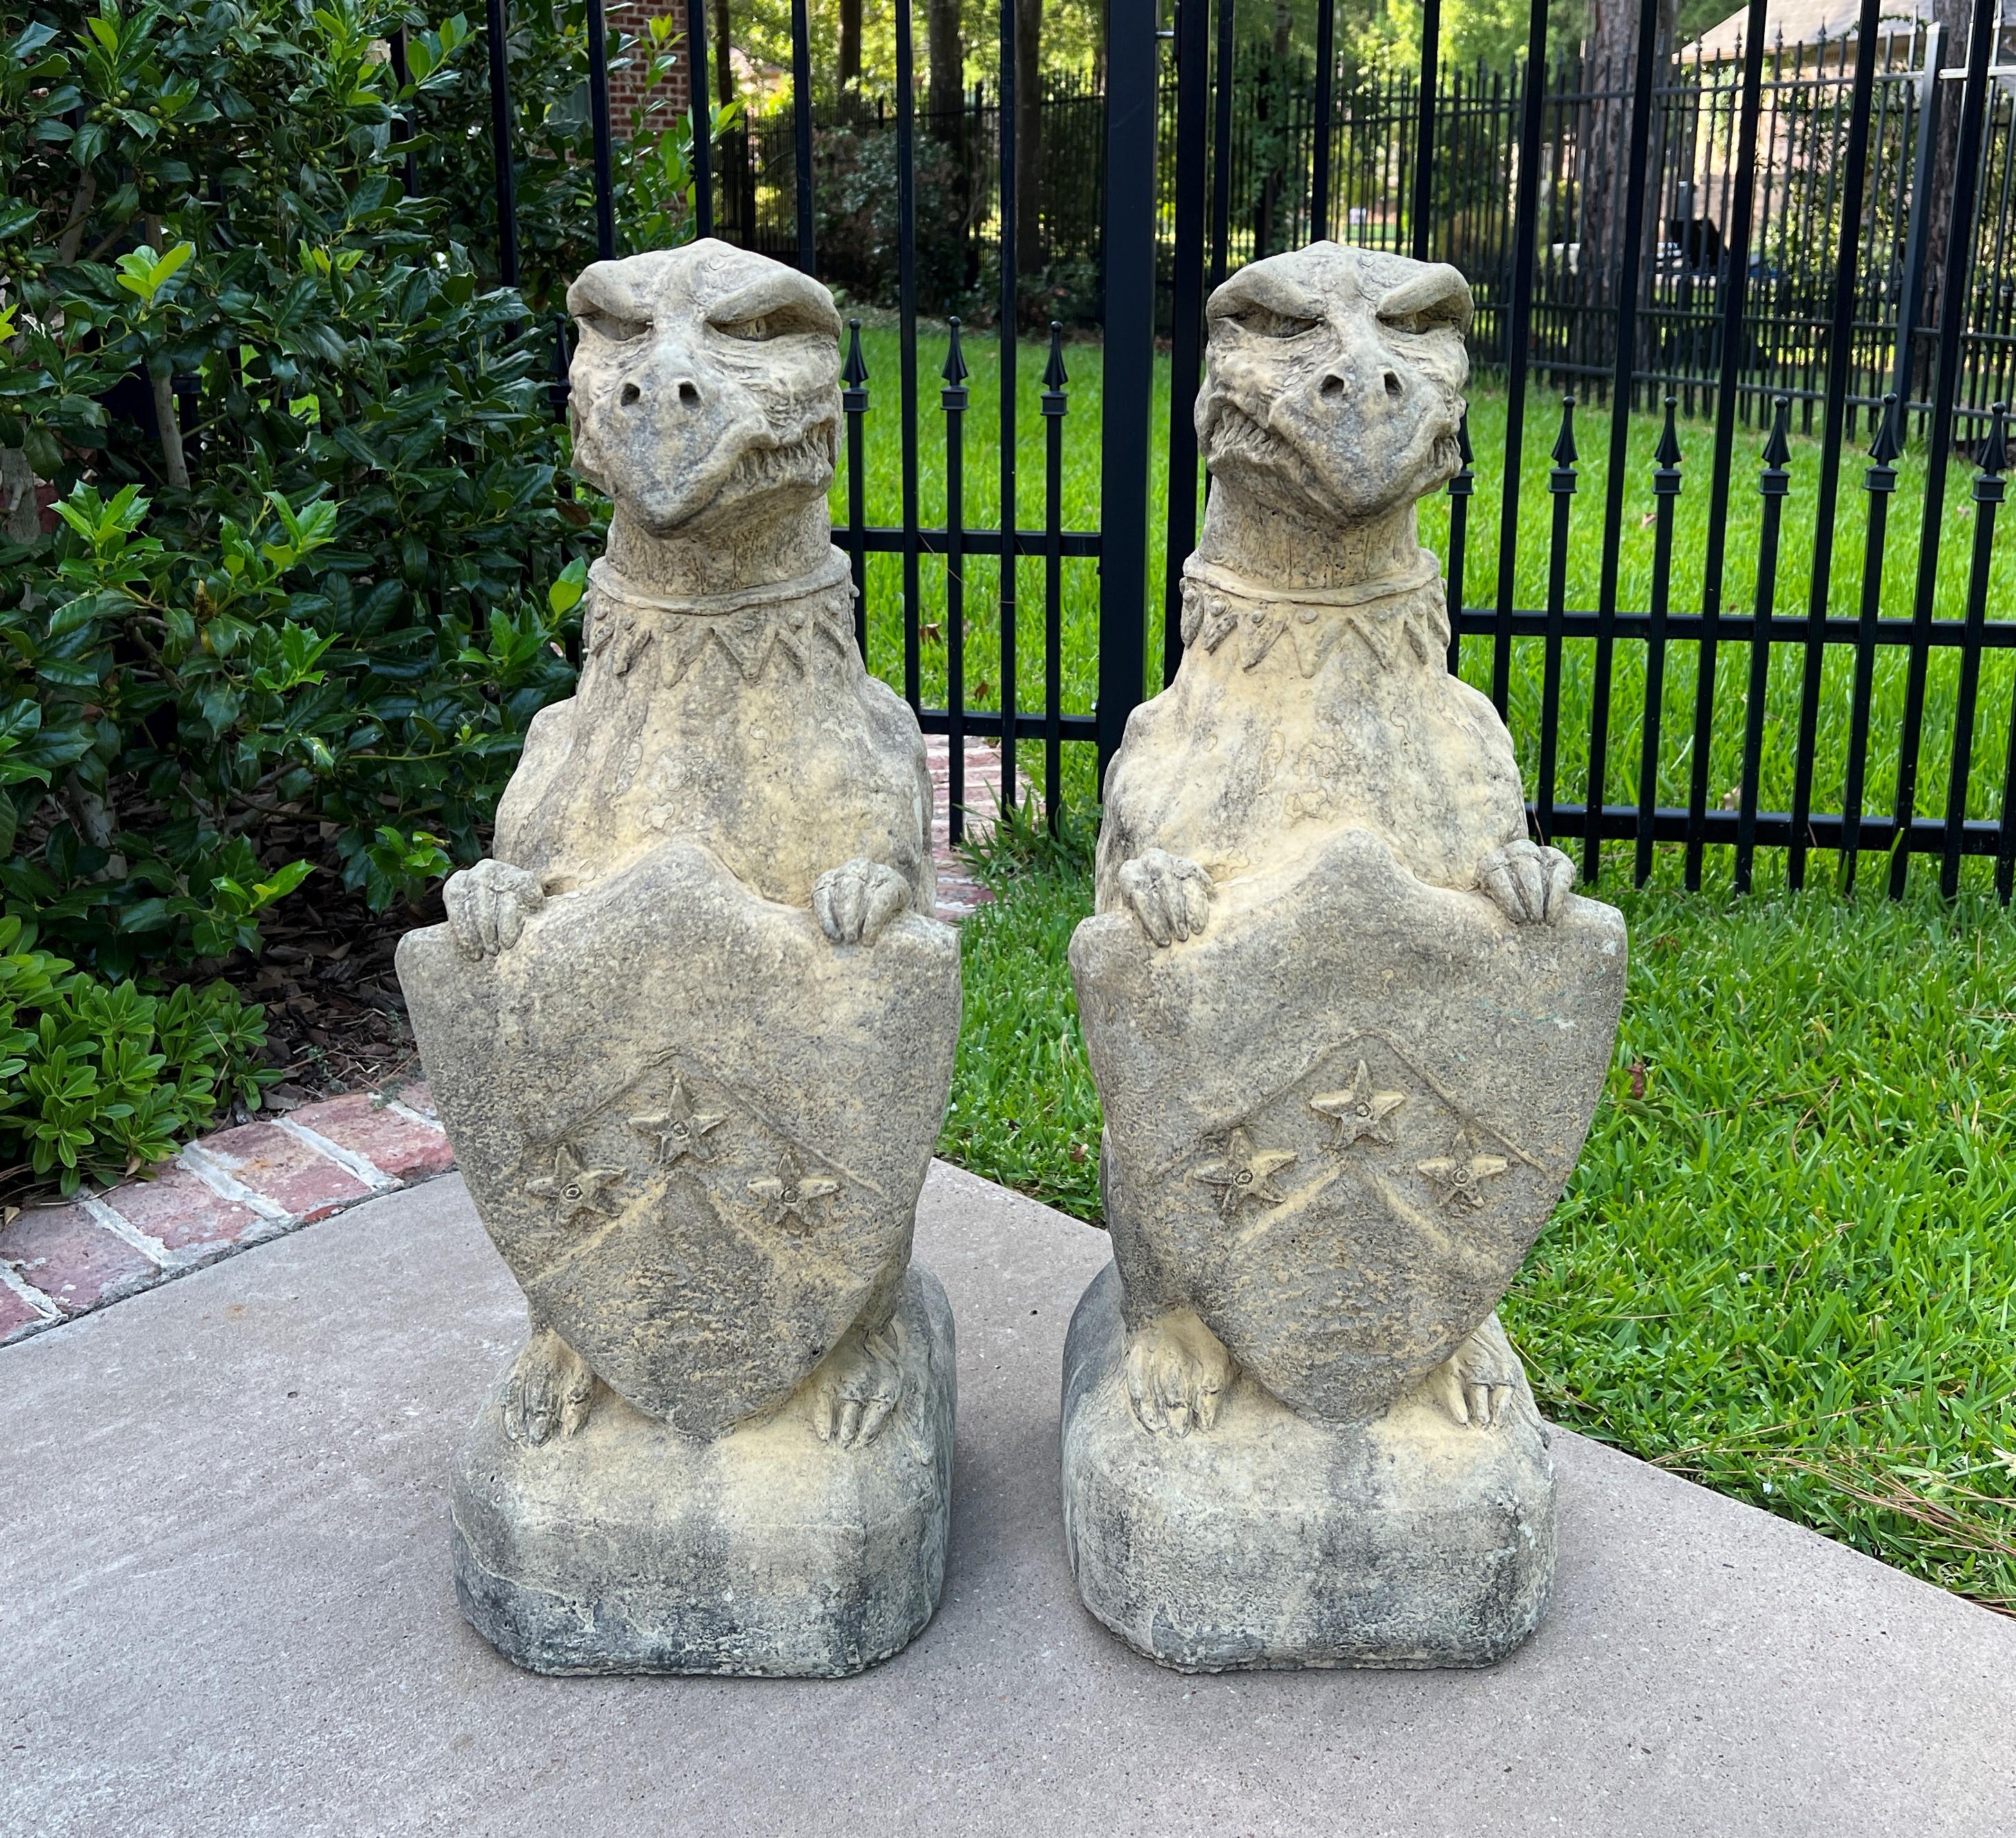 Vintage pair English cast stone Gargoyles Griffins with heraldic shields statues~~garden figures~~statuary~~Architectural Yard Decor

Original aged patina.

 The perfect accent piece or focal point in an entryway, garden, yard, flower bed, or